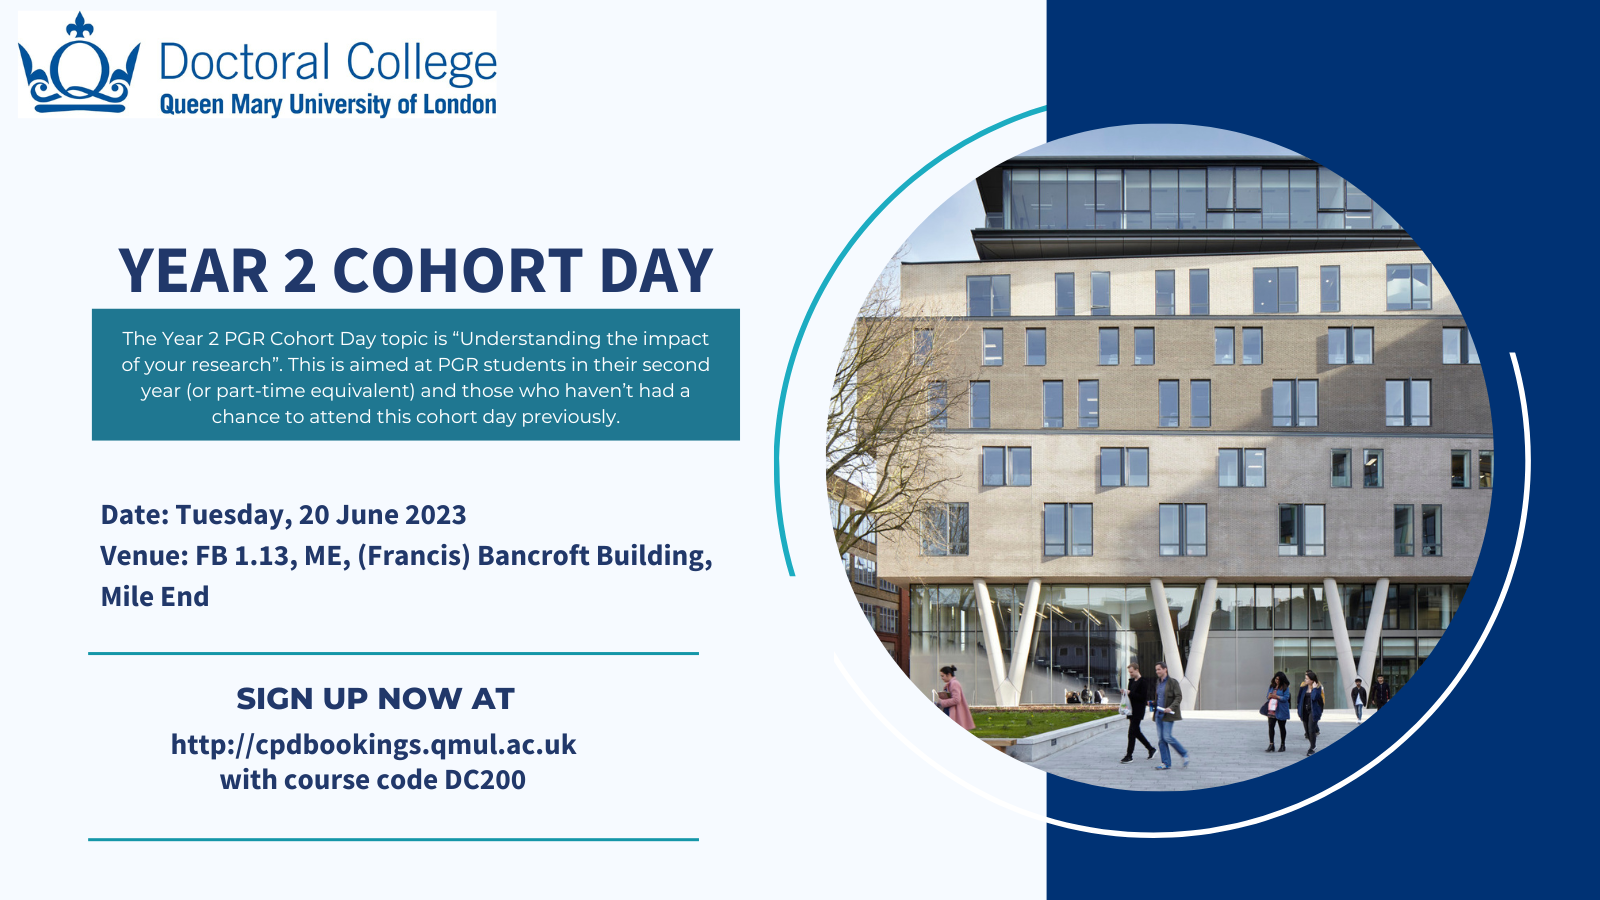 POSTER OF Year 2 Cohort Day